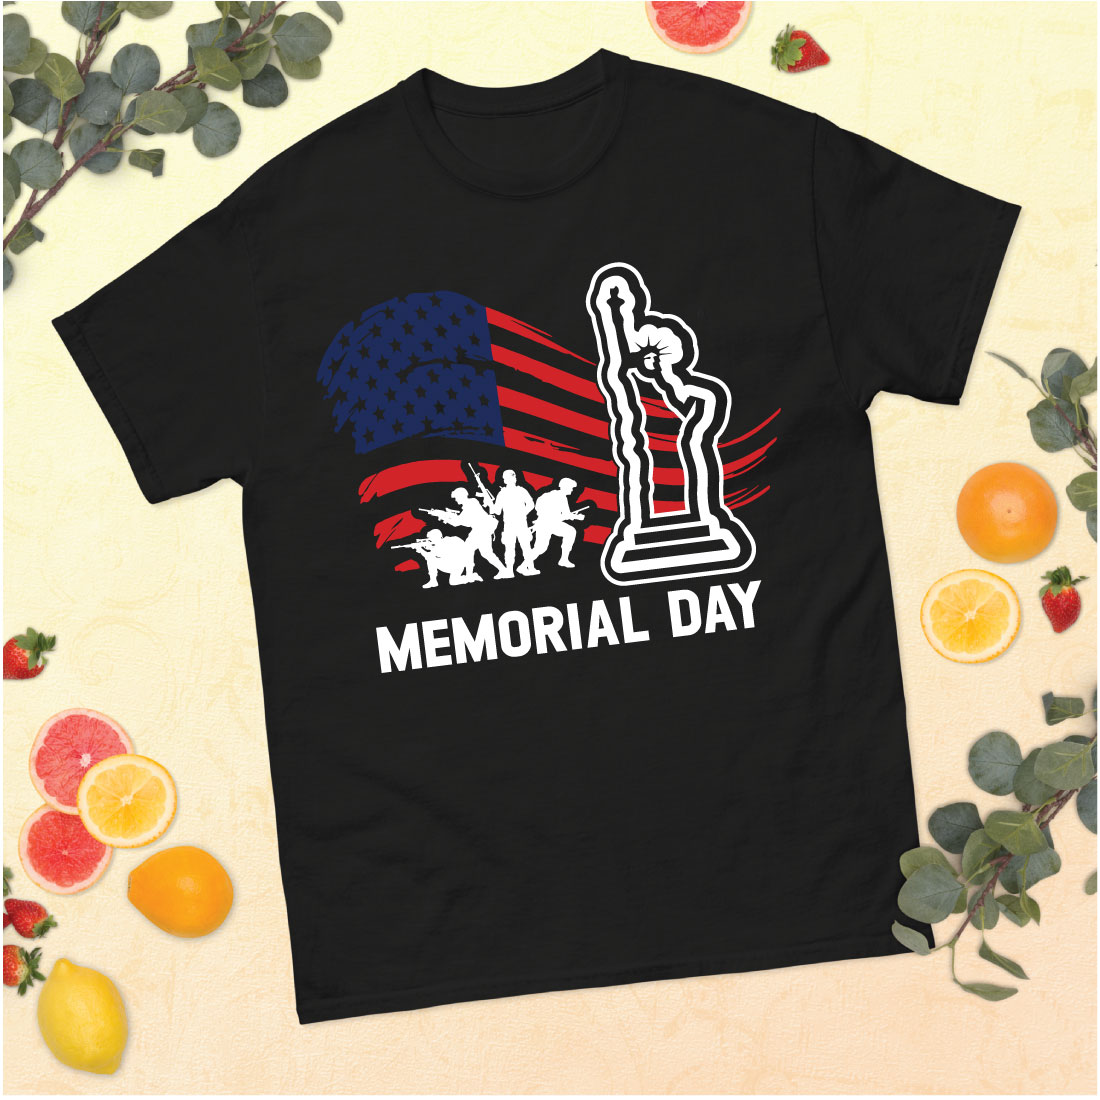 Honoring Our Heroes: Memorial Day T-Shirt Designs for Sale cover image.